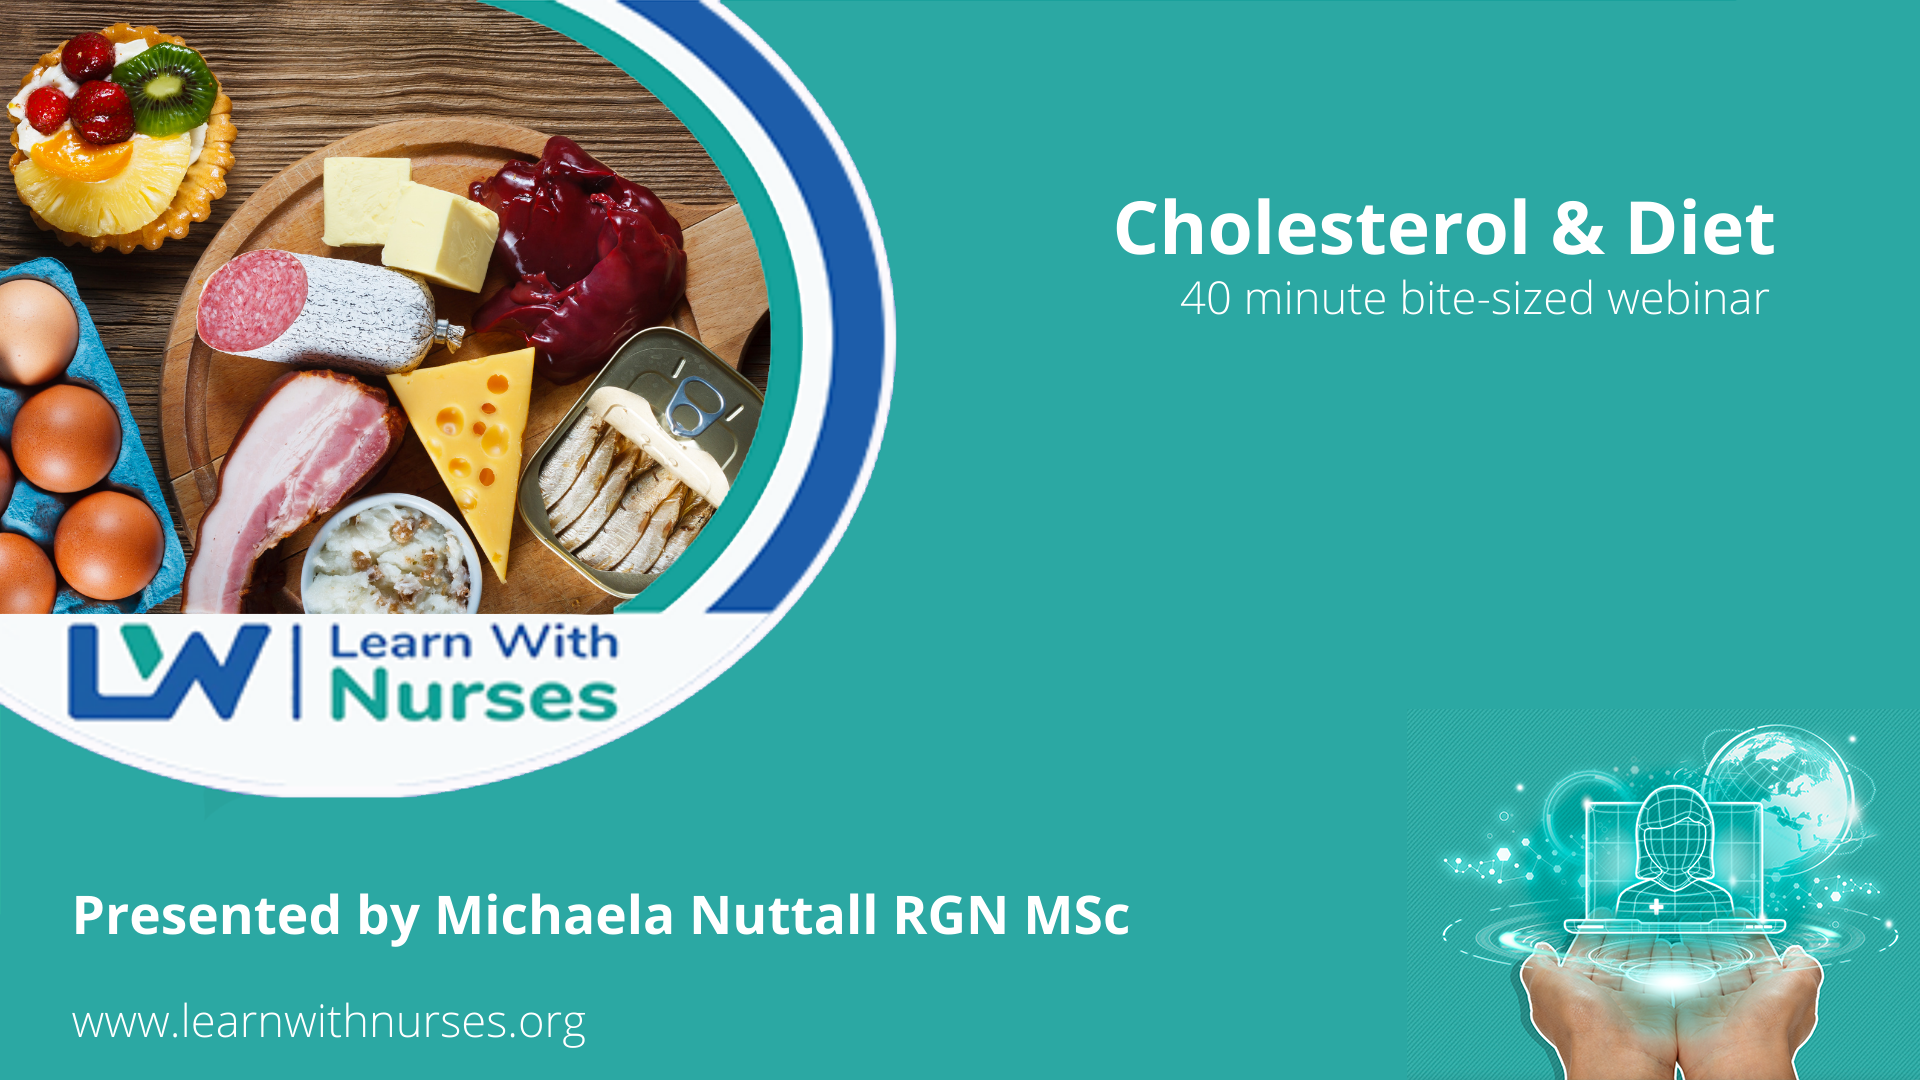 Cholesterol and diet webinar for healthcare professionals